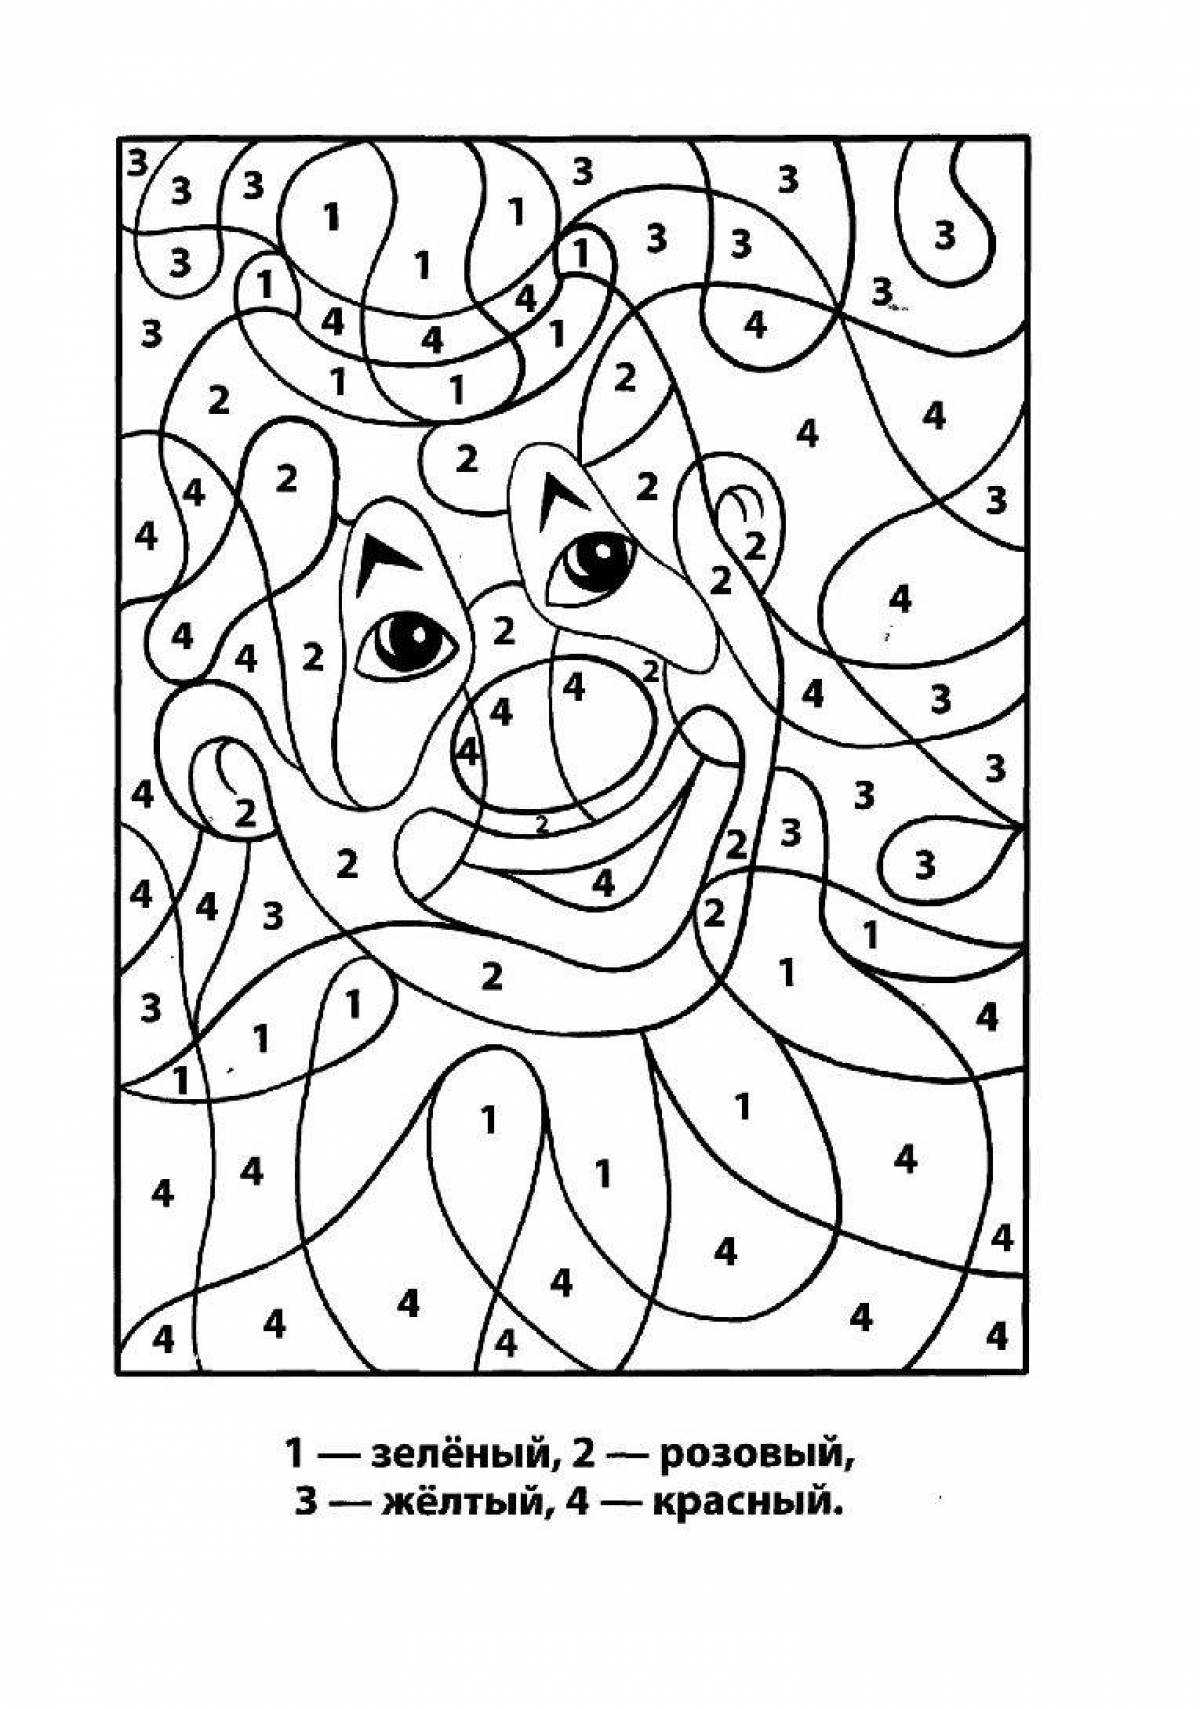 Fun coloring by numbers for 7-8 year olds